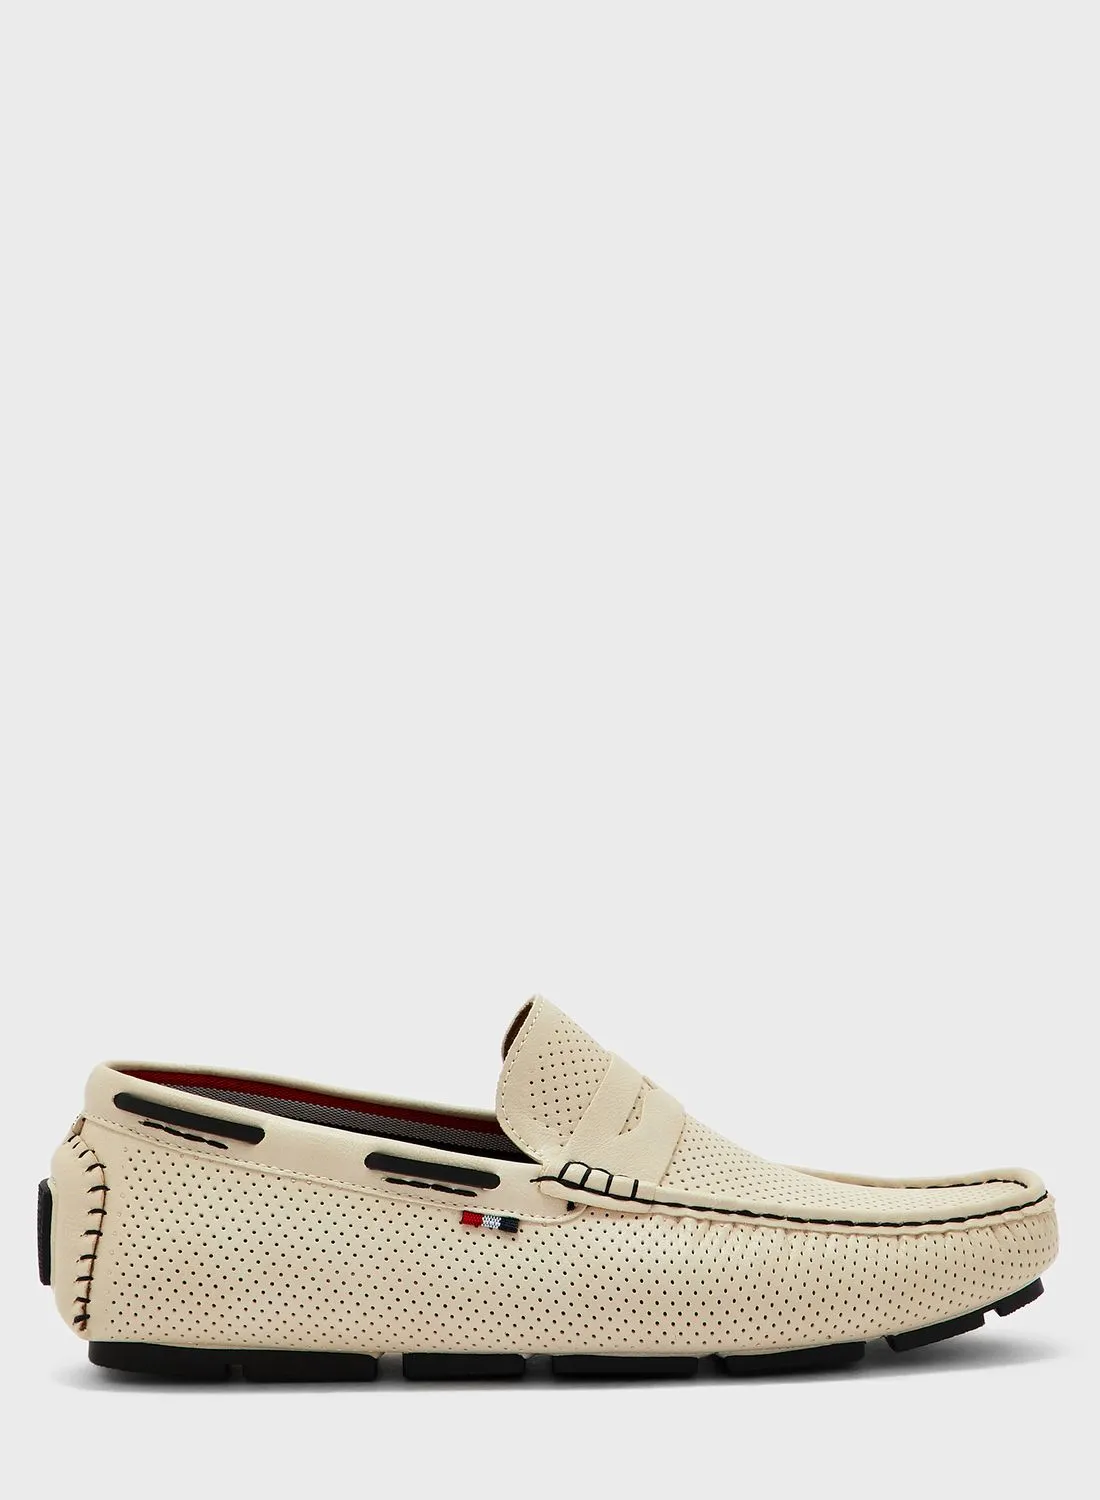 Robert Wood Webbing Highlight Perforation Texture Formal Loafers